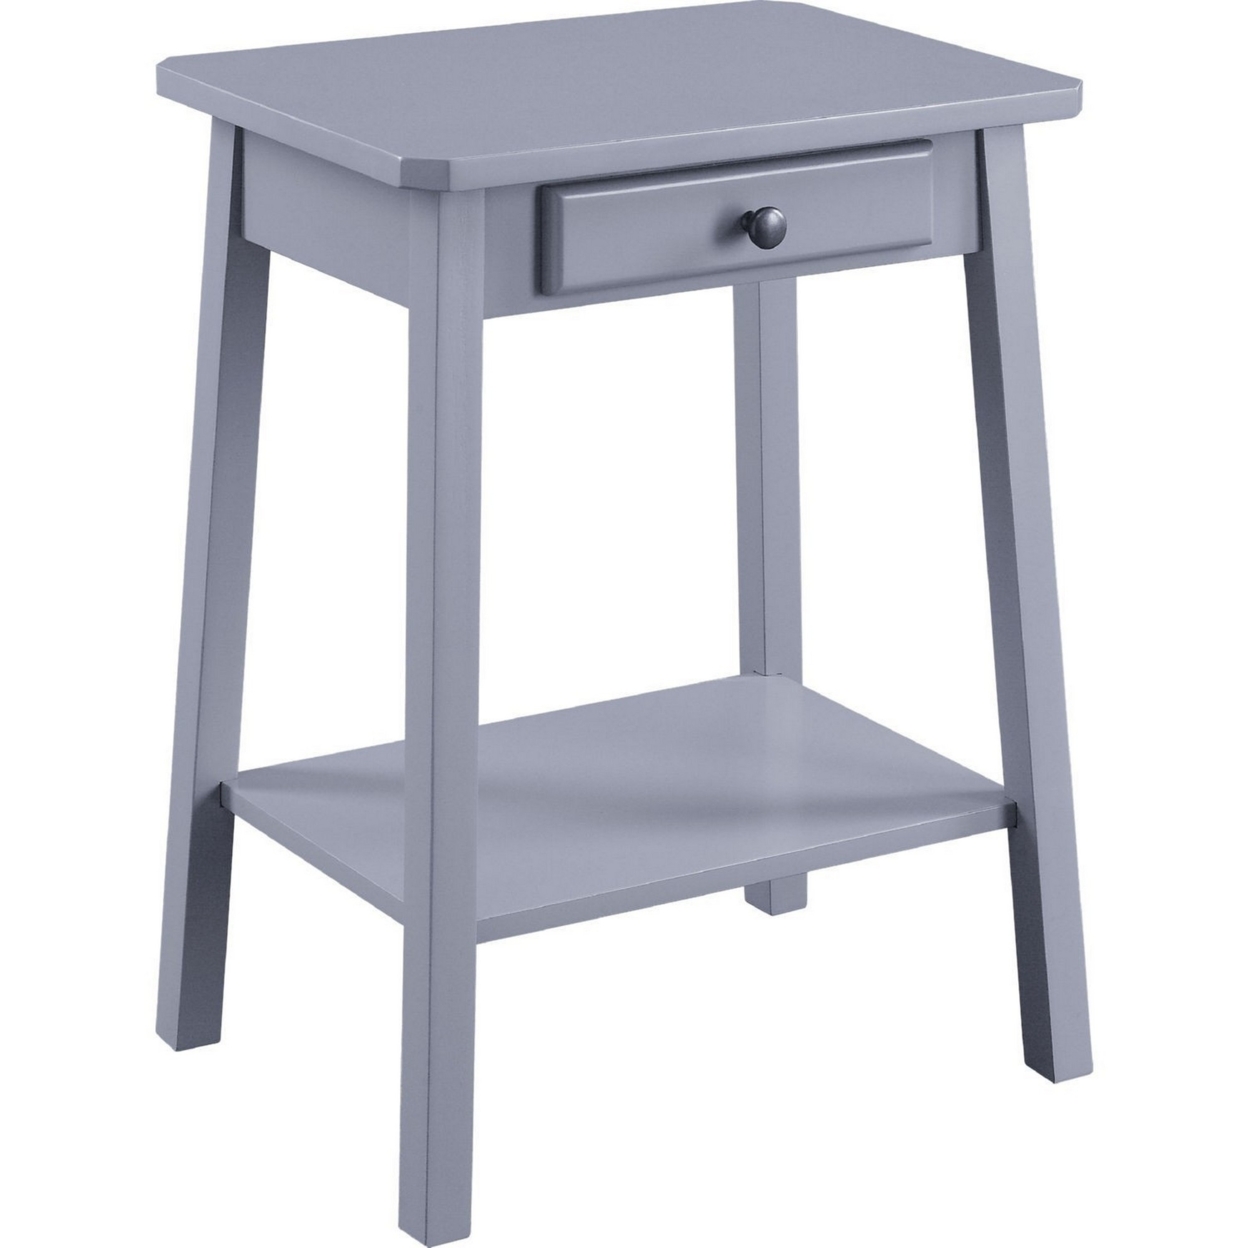 MDF Accent Table With 1 Drawer And Open Shelf, Gray- Saltoro Sherpi